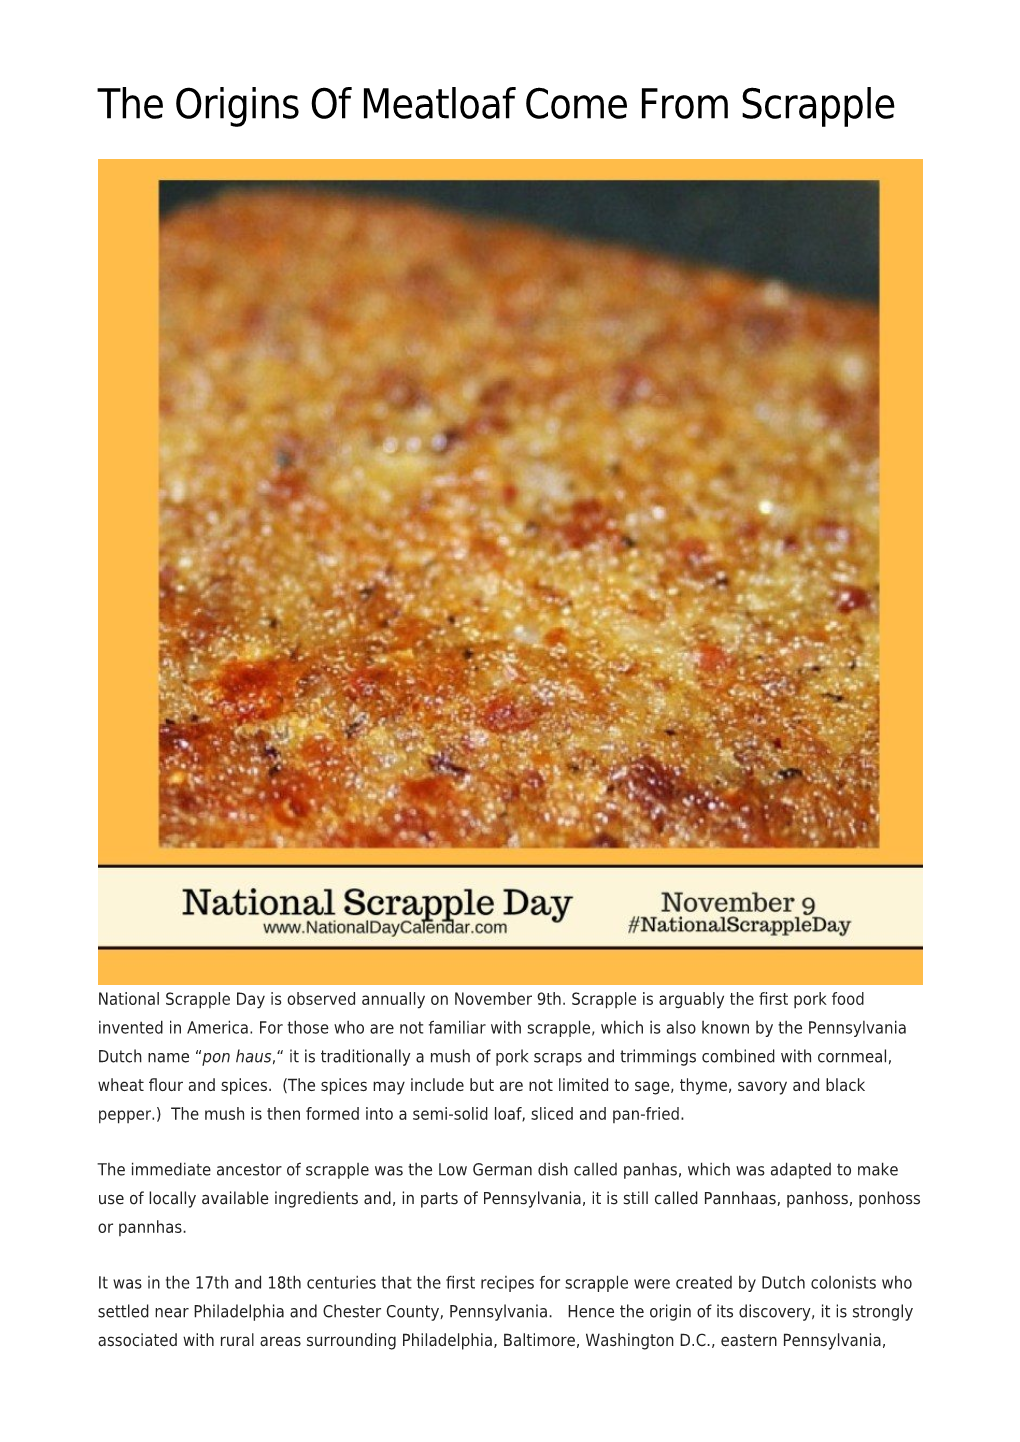 The Origins of Meatloaf Come from Scrapple